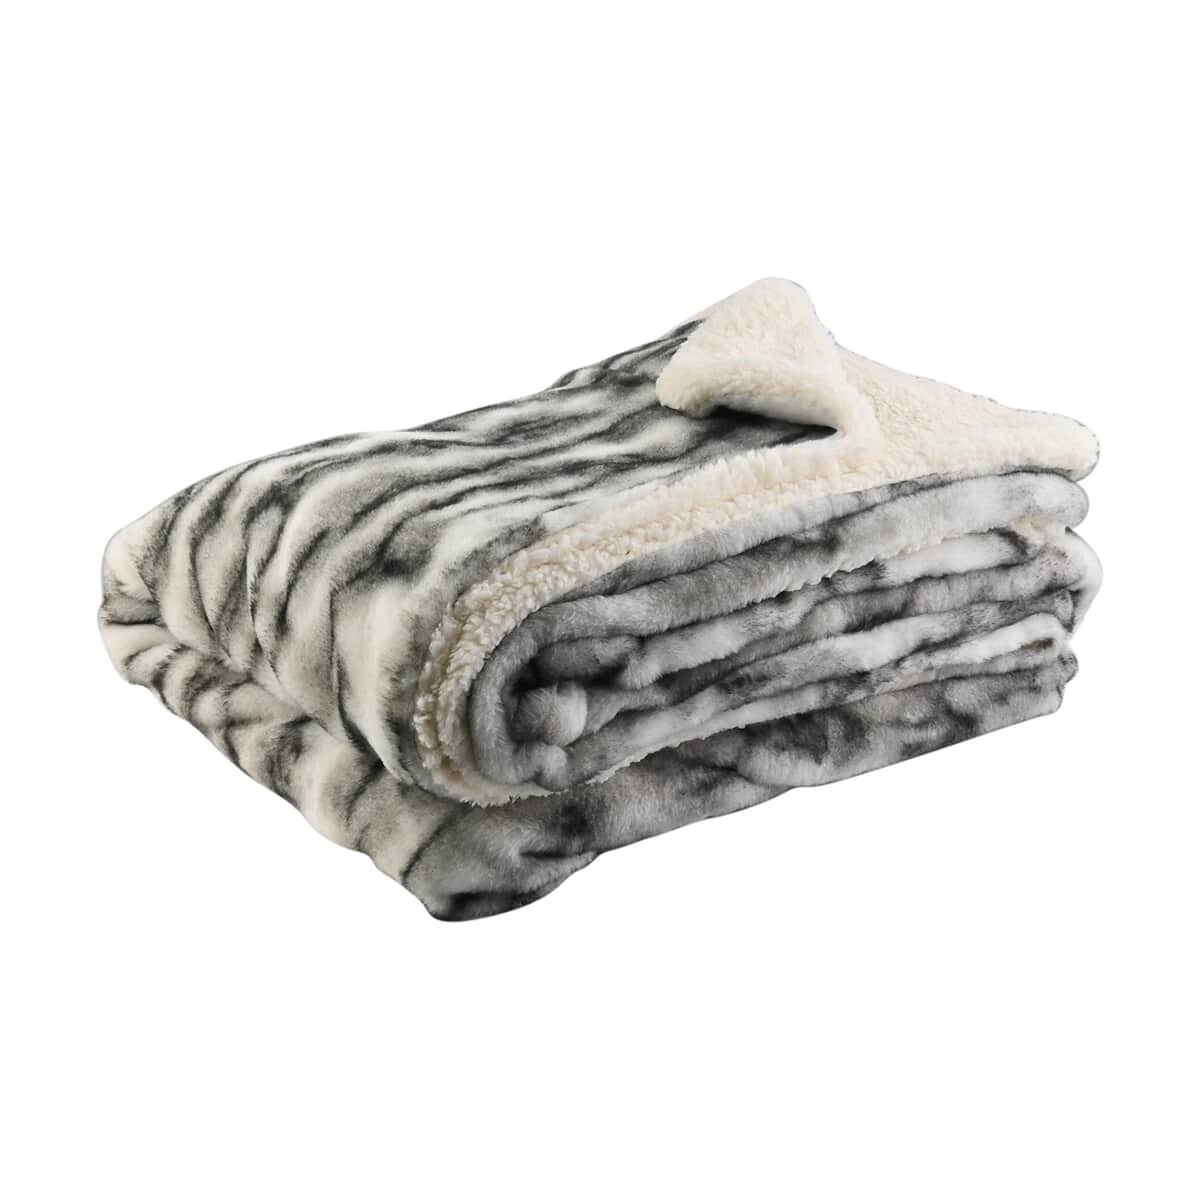 HOMESMART Black and White Cozy Faux Fur Sherpa Blanket (59"x78") image number 2